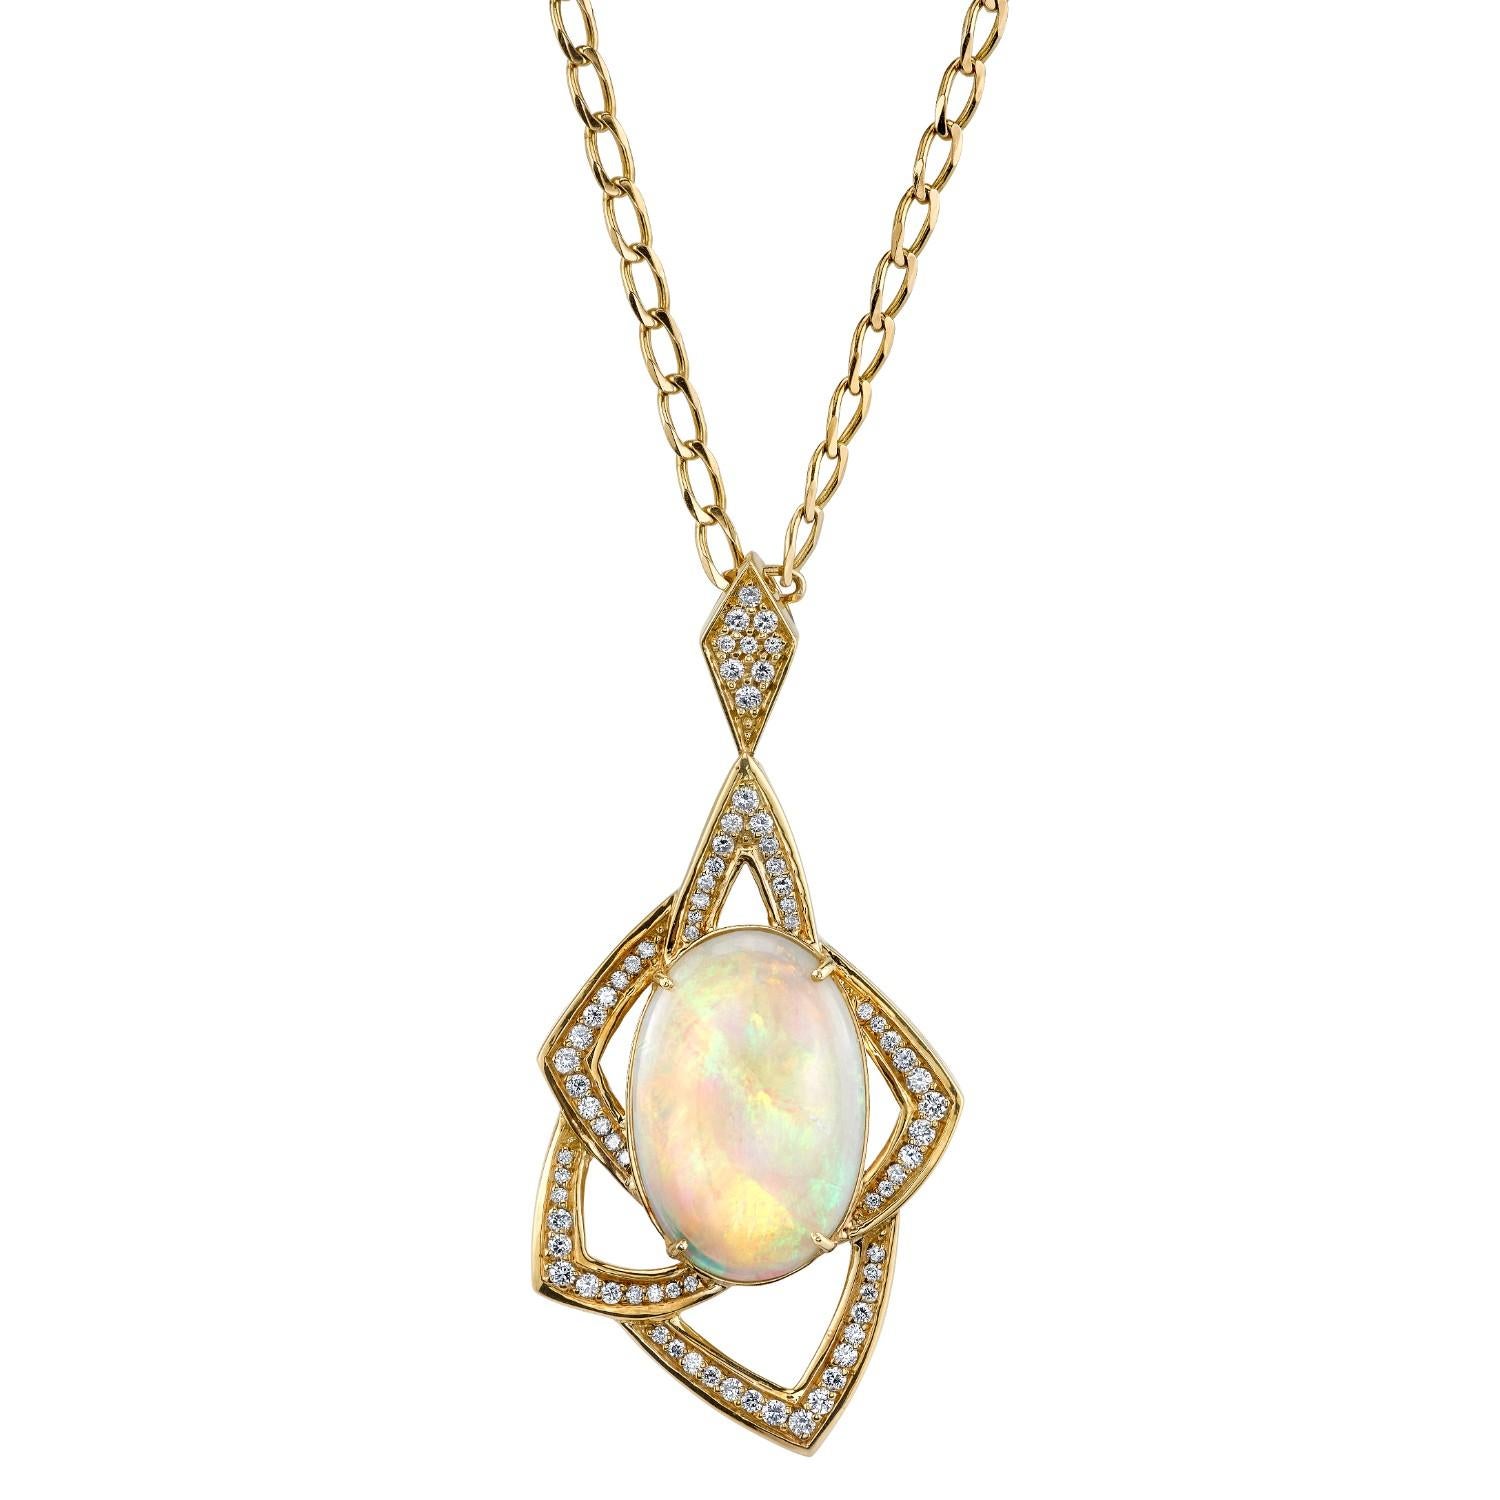 This striking pendant features a colorful 9.89 carat Australian opal set with round brilliant cut diamonds in a unique, Retro-style design. The opal is translucent with bright patches of green, yellow and red, which makes this pendant truly